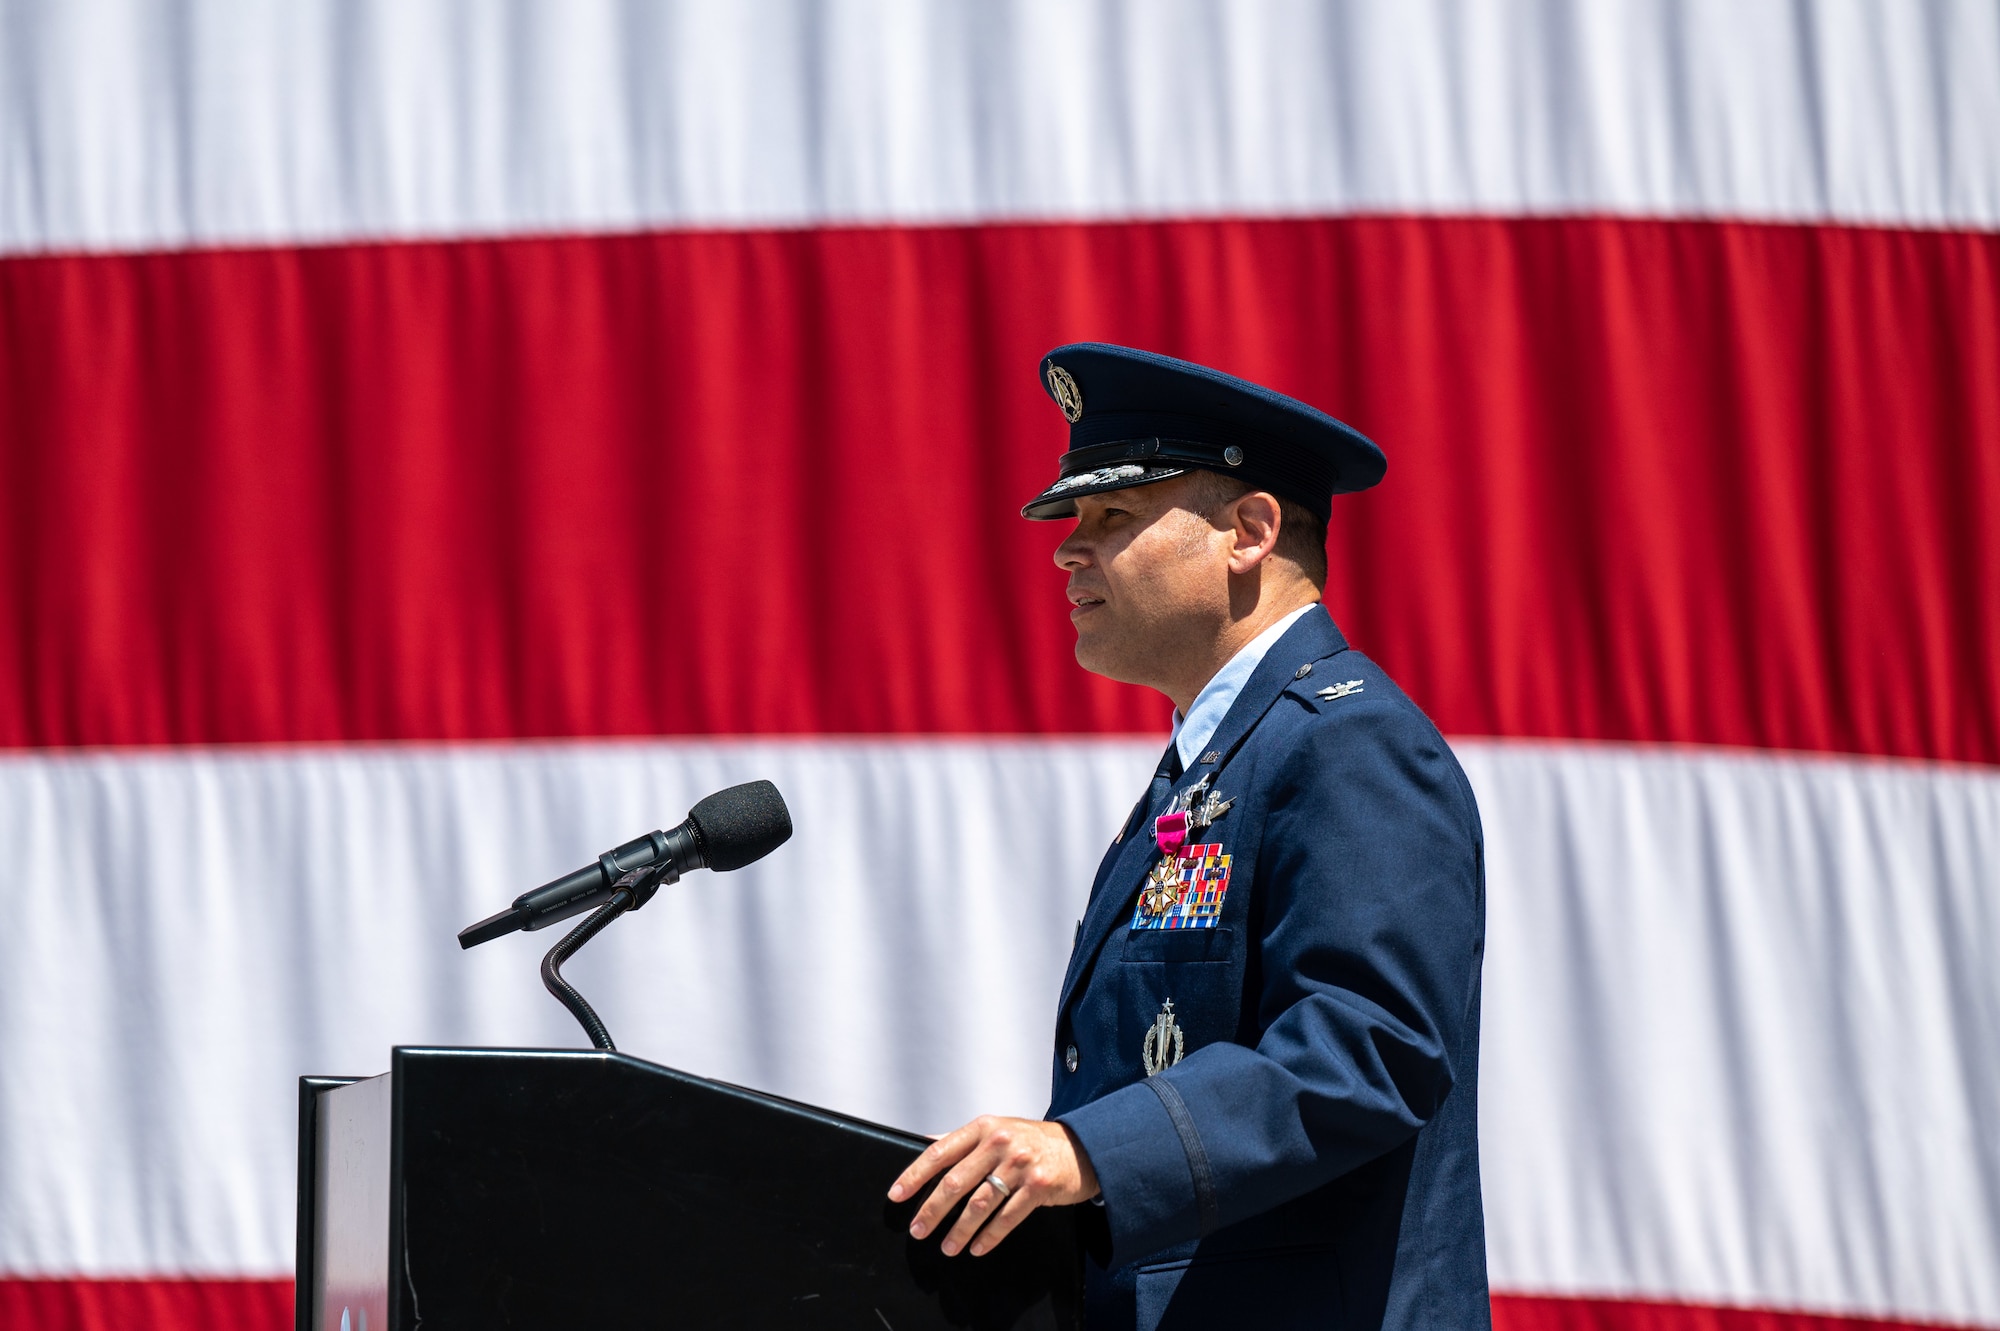 U.S. Space Force Col. Kyle Pumroy, the Delta 11 outgoing commander, delivers remarks during Delta 11’s change of command ceremony at Schriever Space Force Base, Colorado, July 7, 2023. Delta 11 is responsible for delivering realistic, threat-informed test and training resources to U.S. Space Force, joint, and coalition space operators via live, virtual, and constructive threat replication, leveraging the National Space Test and Training Complex across multiple space warfighting disciplines. (U.S. Space Force photo by Ethan Johnson)